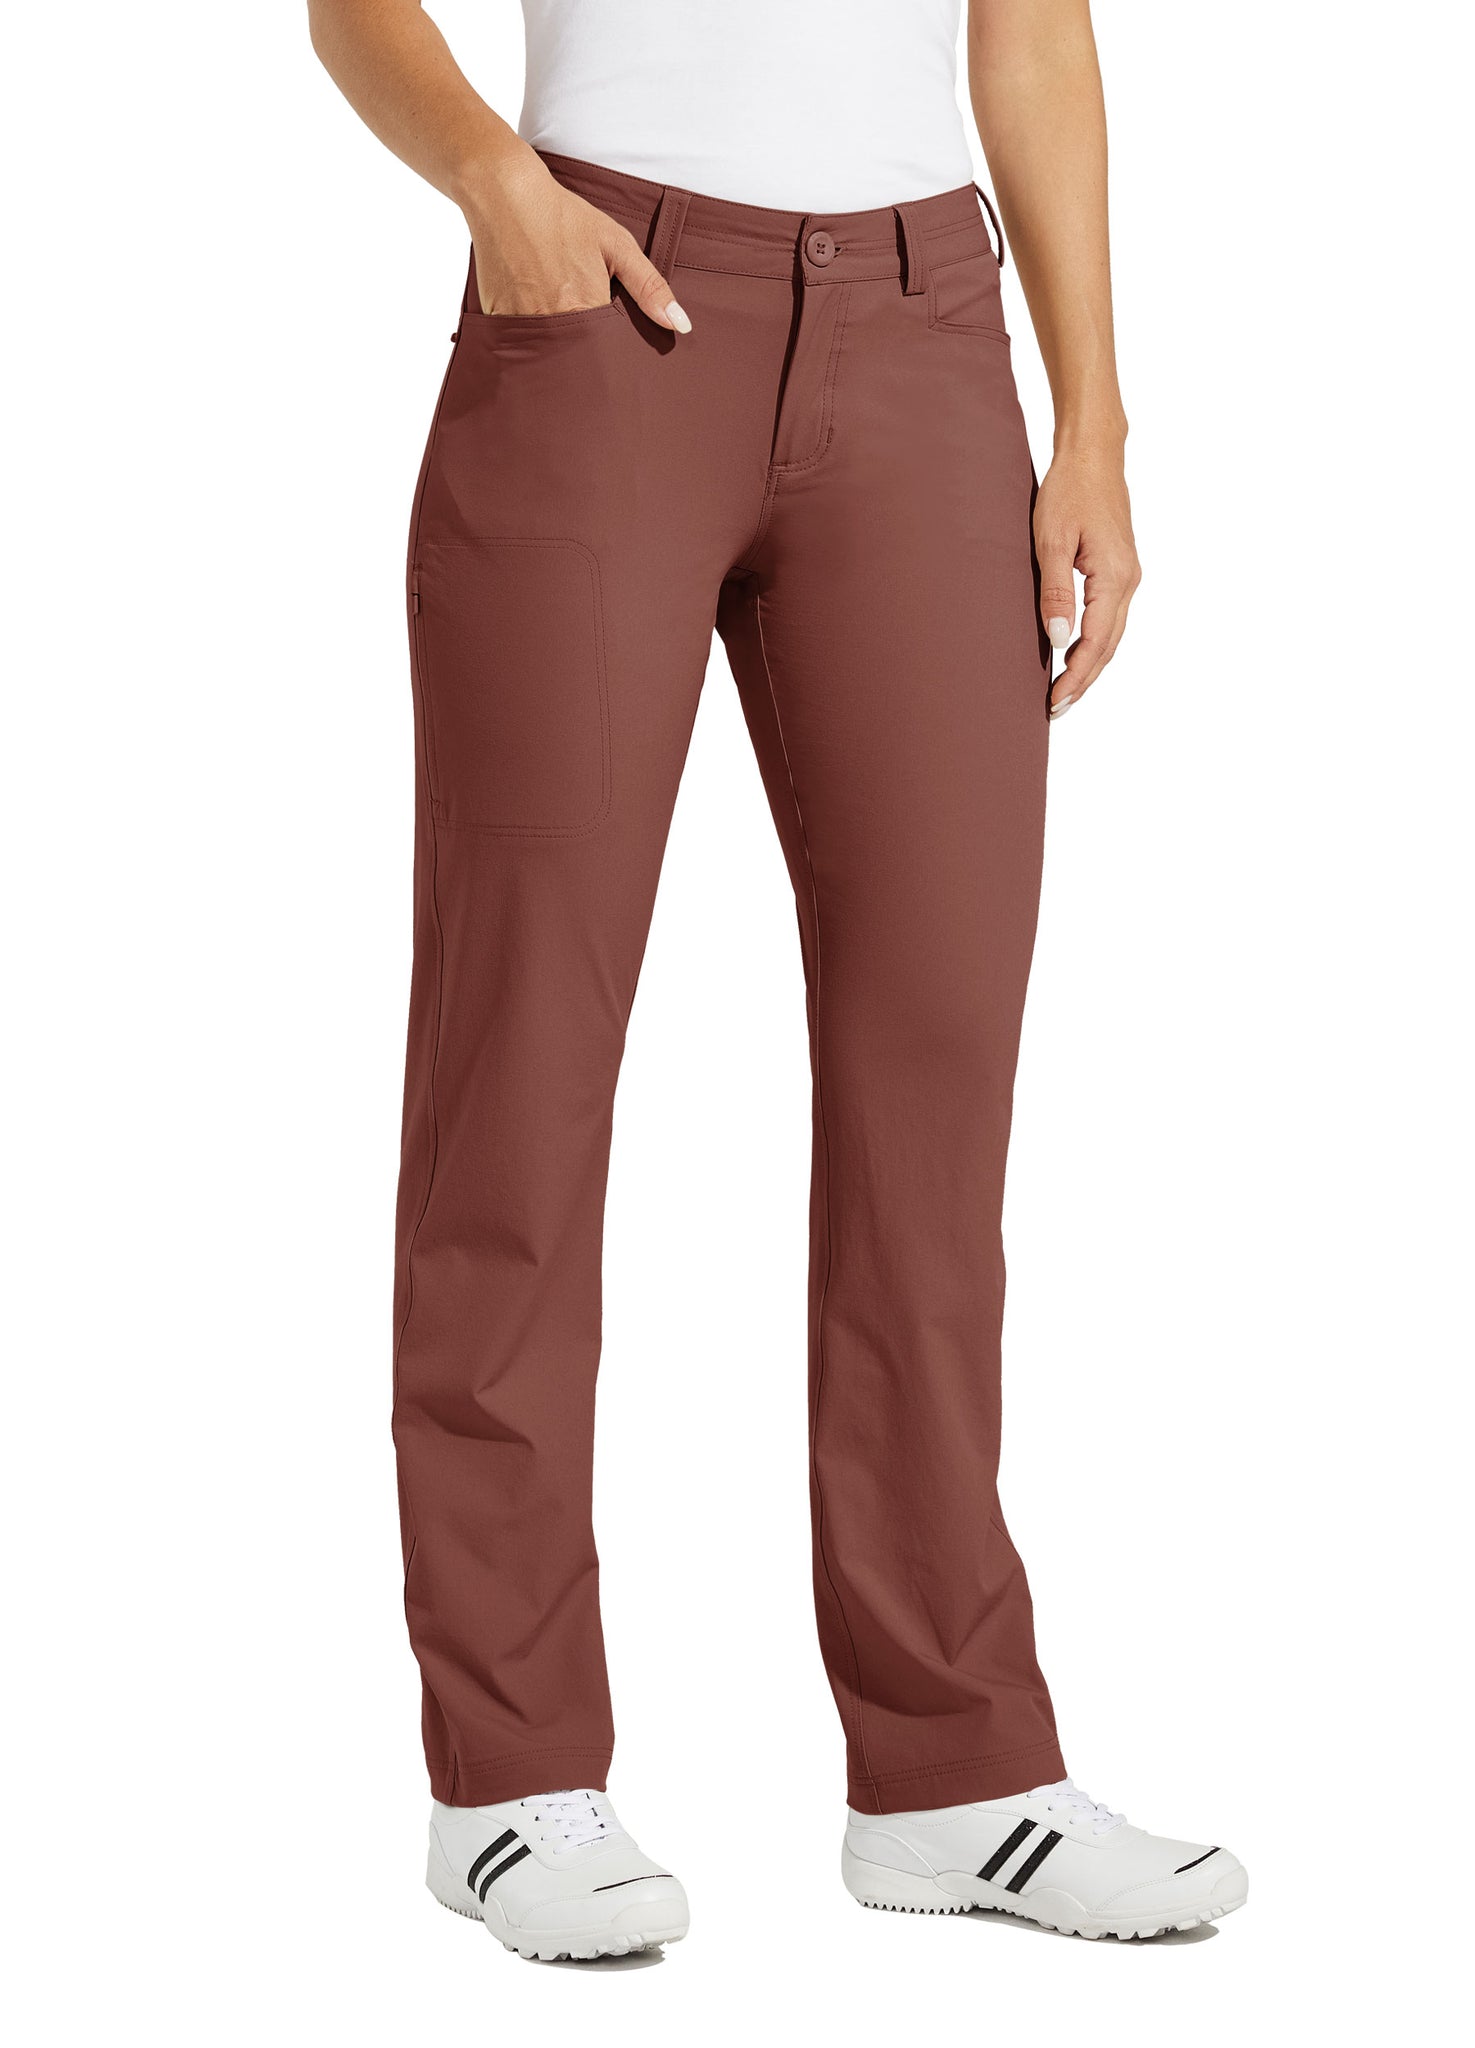 Women's Stretch Athletic Pants